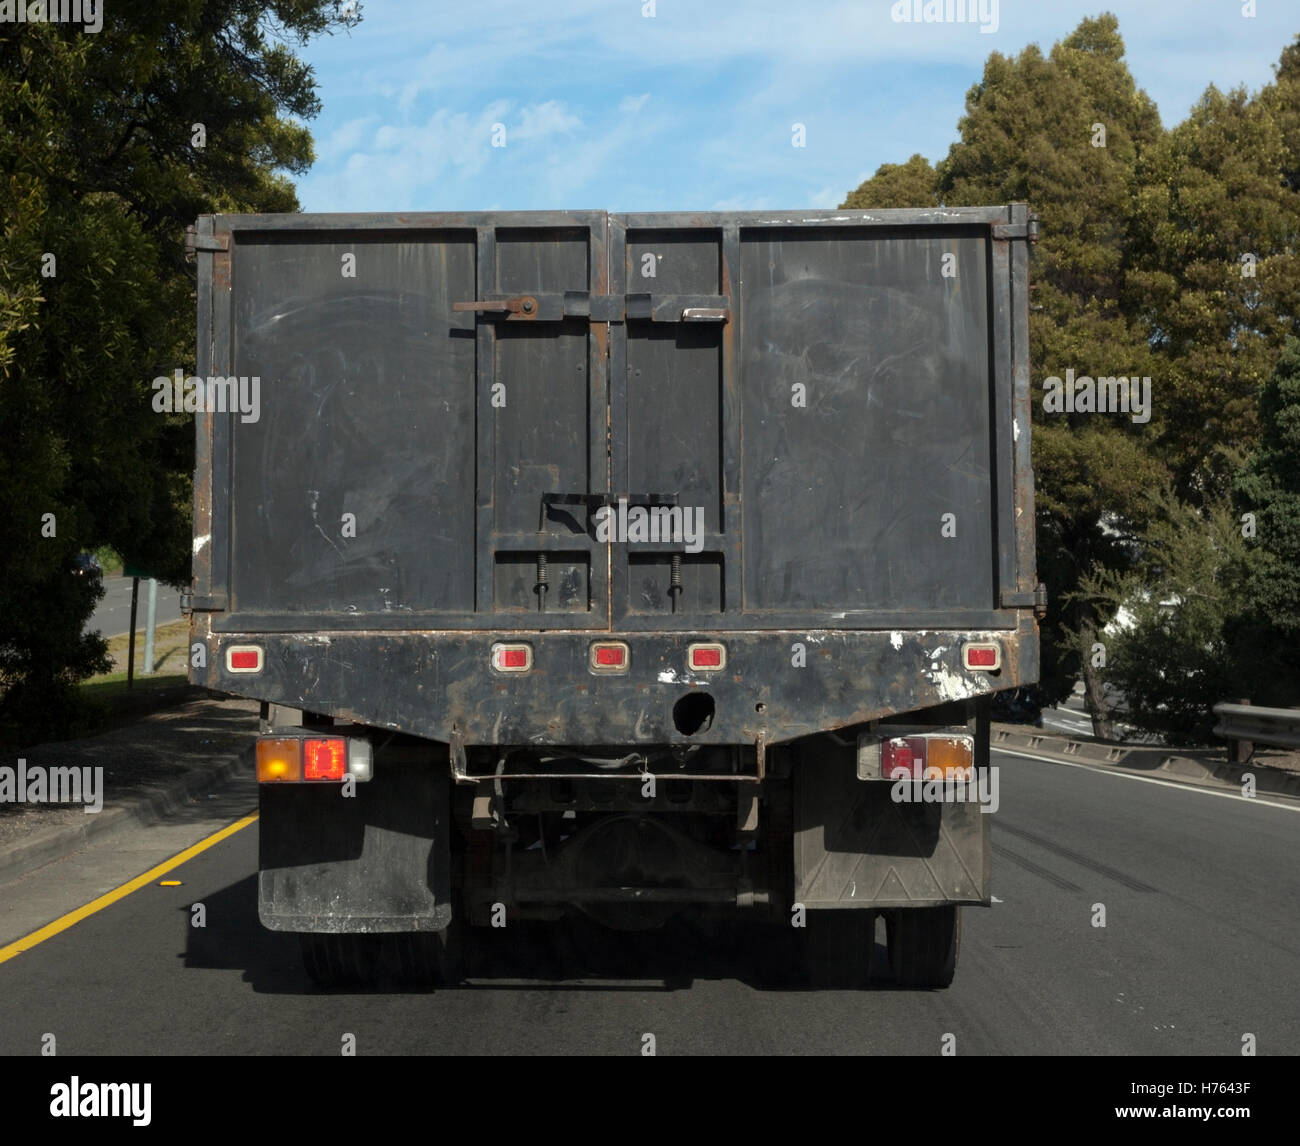 Rear view of black construction truck on rural road Stock Photo